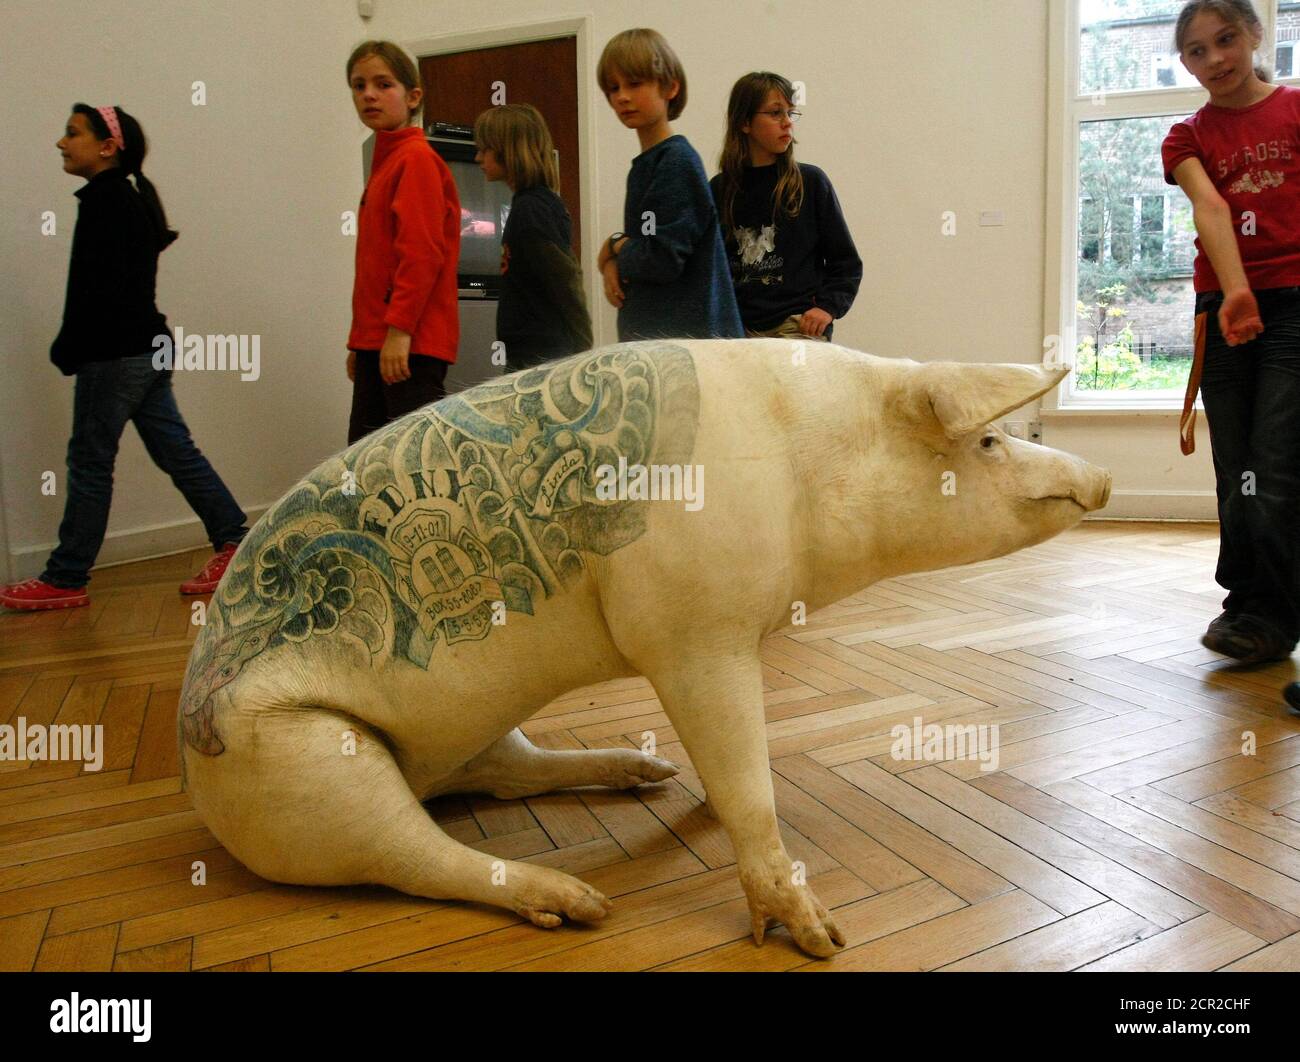 Children watch the artwork 'Linda' by Belgian artist Wim Delvoye of a stuffed pig at the 'Tierperspektiven' (animal perspective) exhibition inside the Georg-Kolbe Museum in Berlin May 8, 2009.    REUTERS/Fabrizio Bensch (GERMANY SOCIETY ENTERTAINMENT) Stock Photo